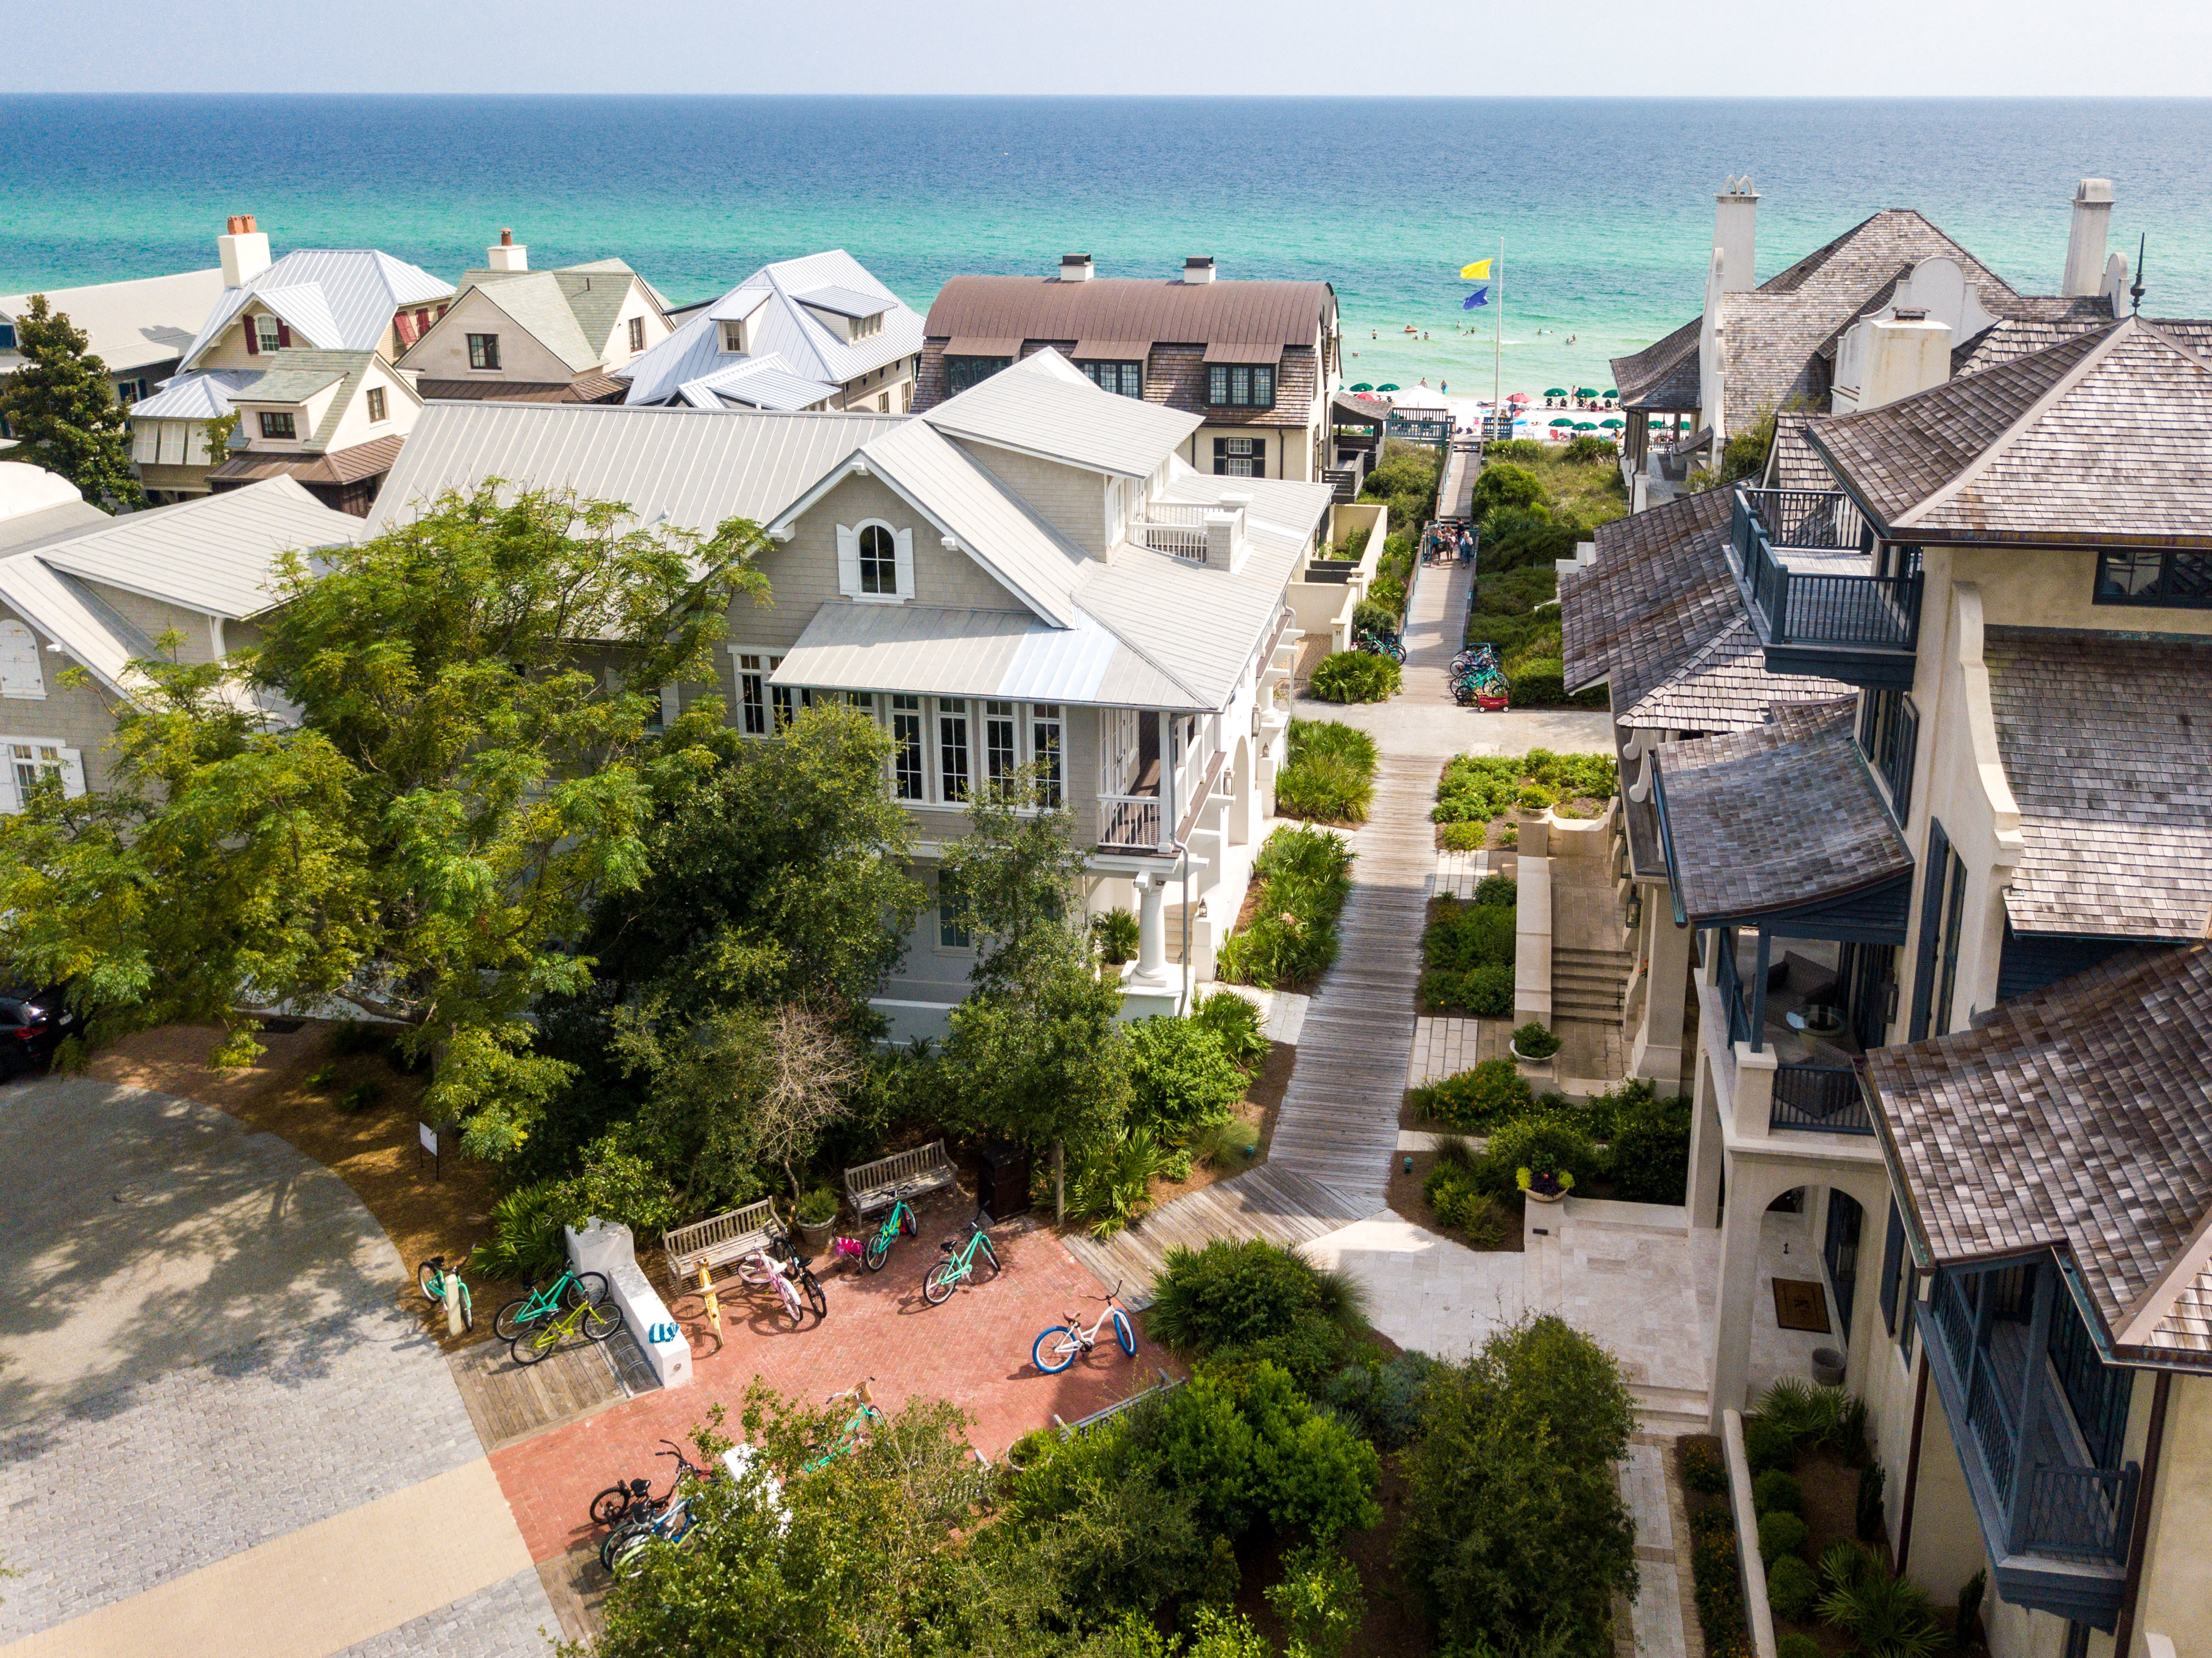 Rosemary Beach Homes off Scenic 30A in Florida